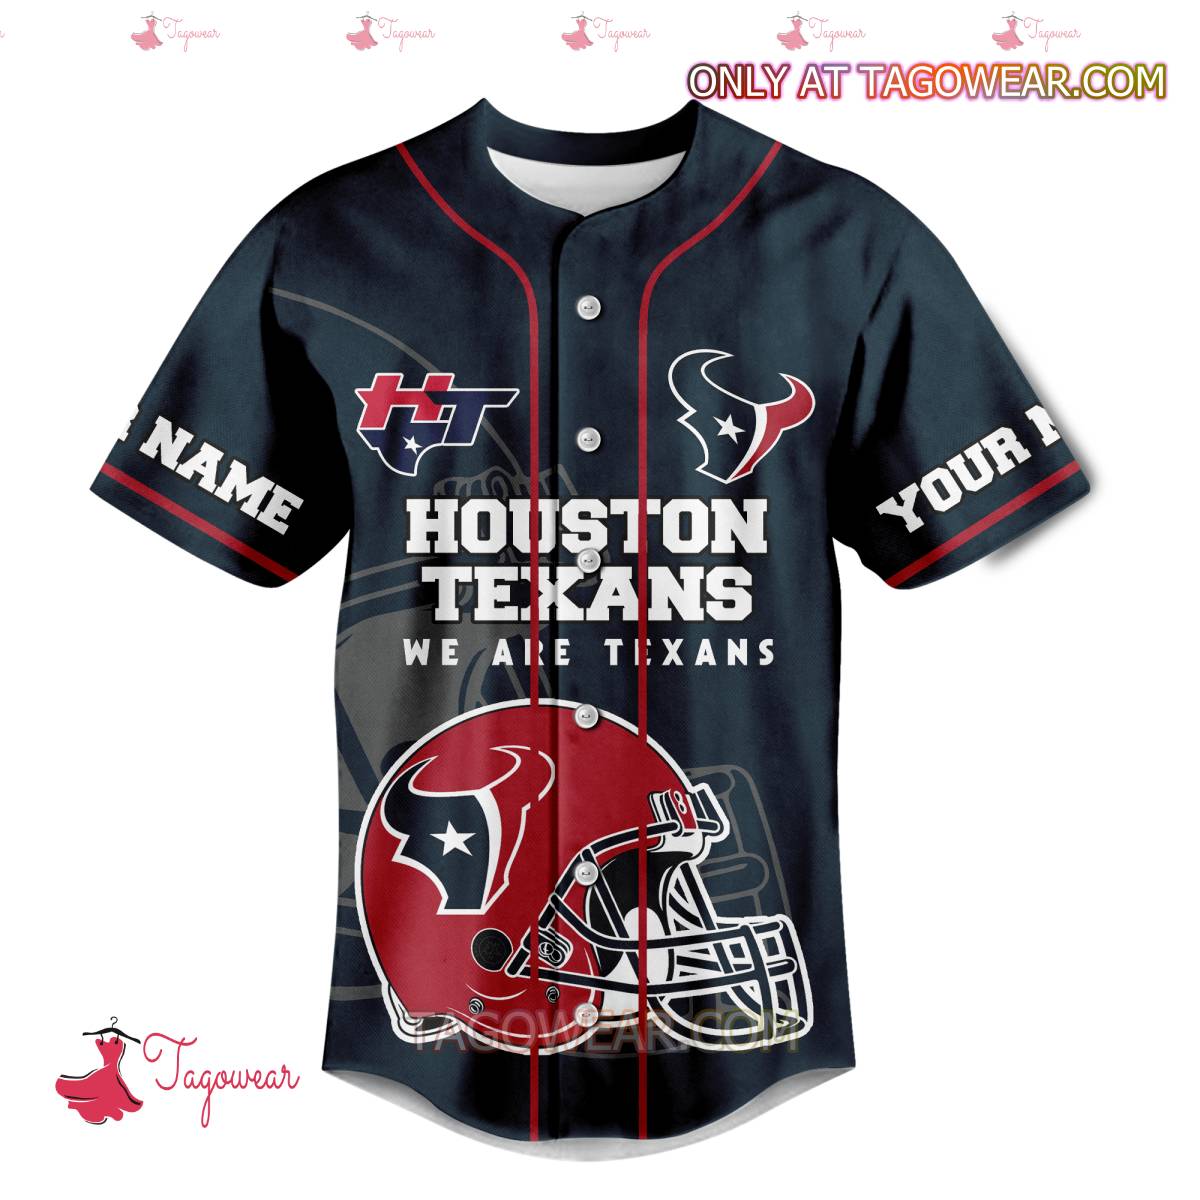 Houston Texans Officially The World's Coolest Personalized Baseball Jersey a